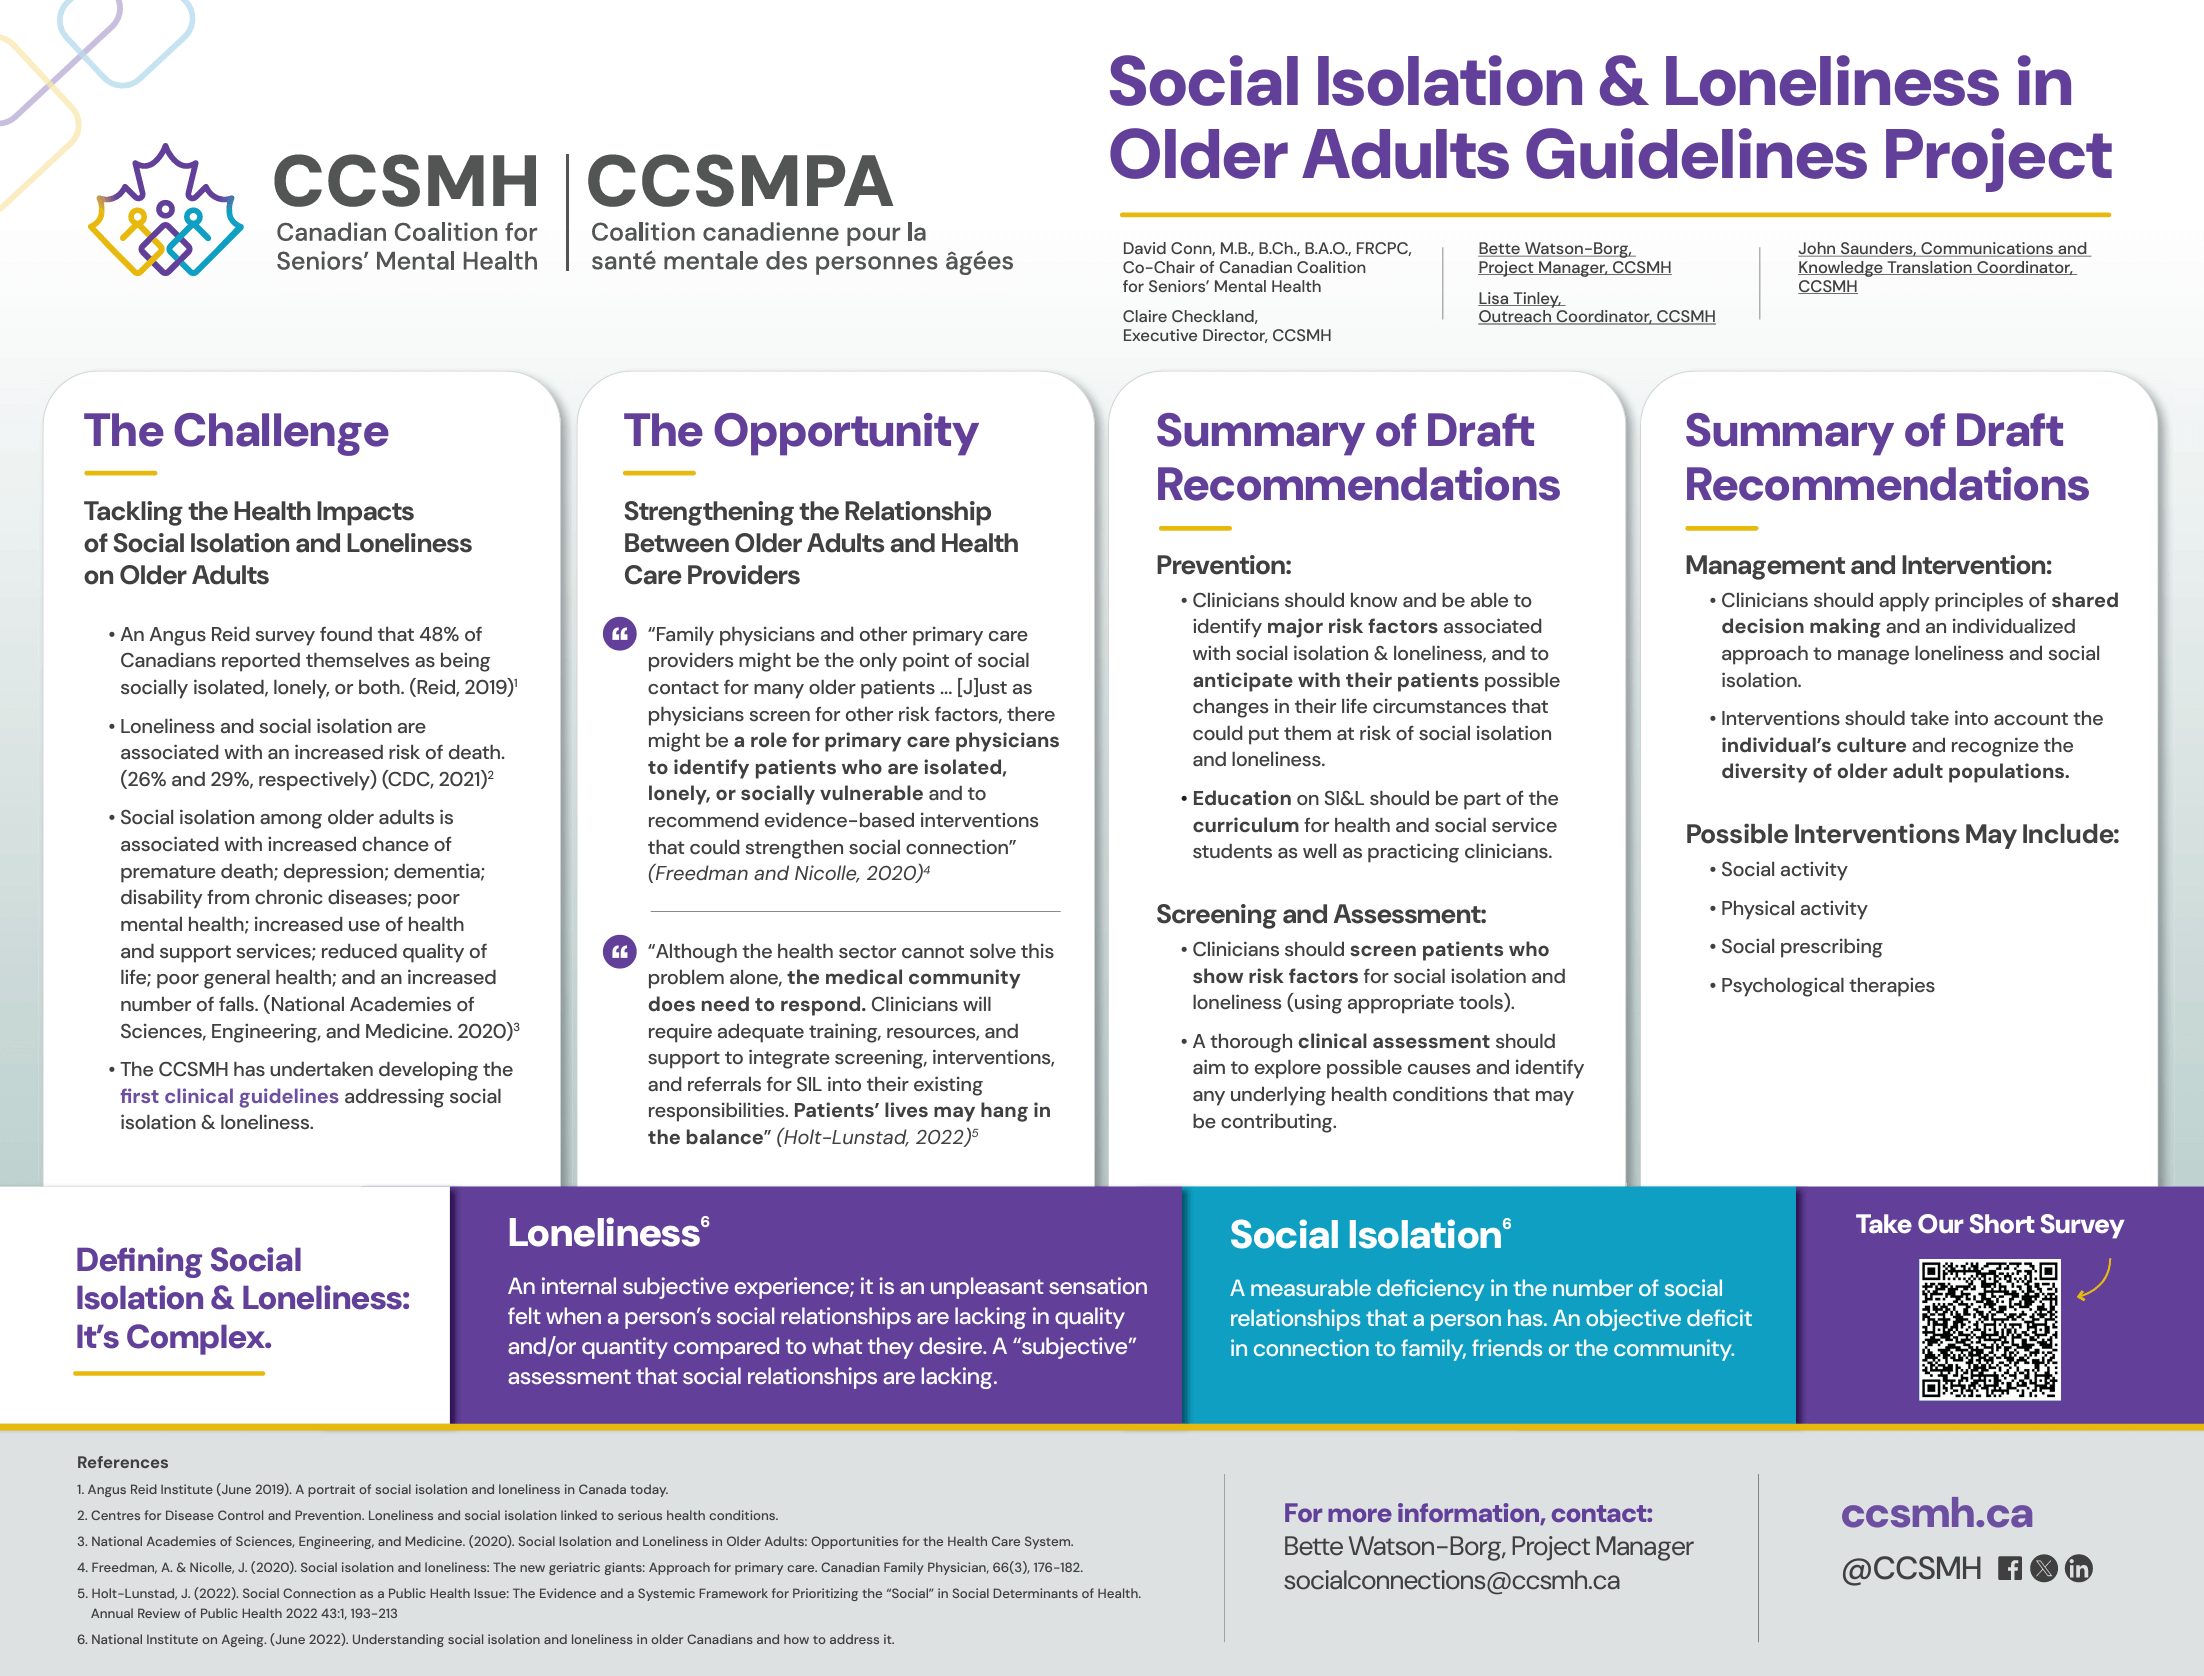 Academic poster with lots of text and information accented with purple and cyan blue elements that mtahc the CCSMH logo.